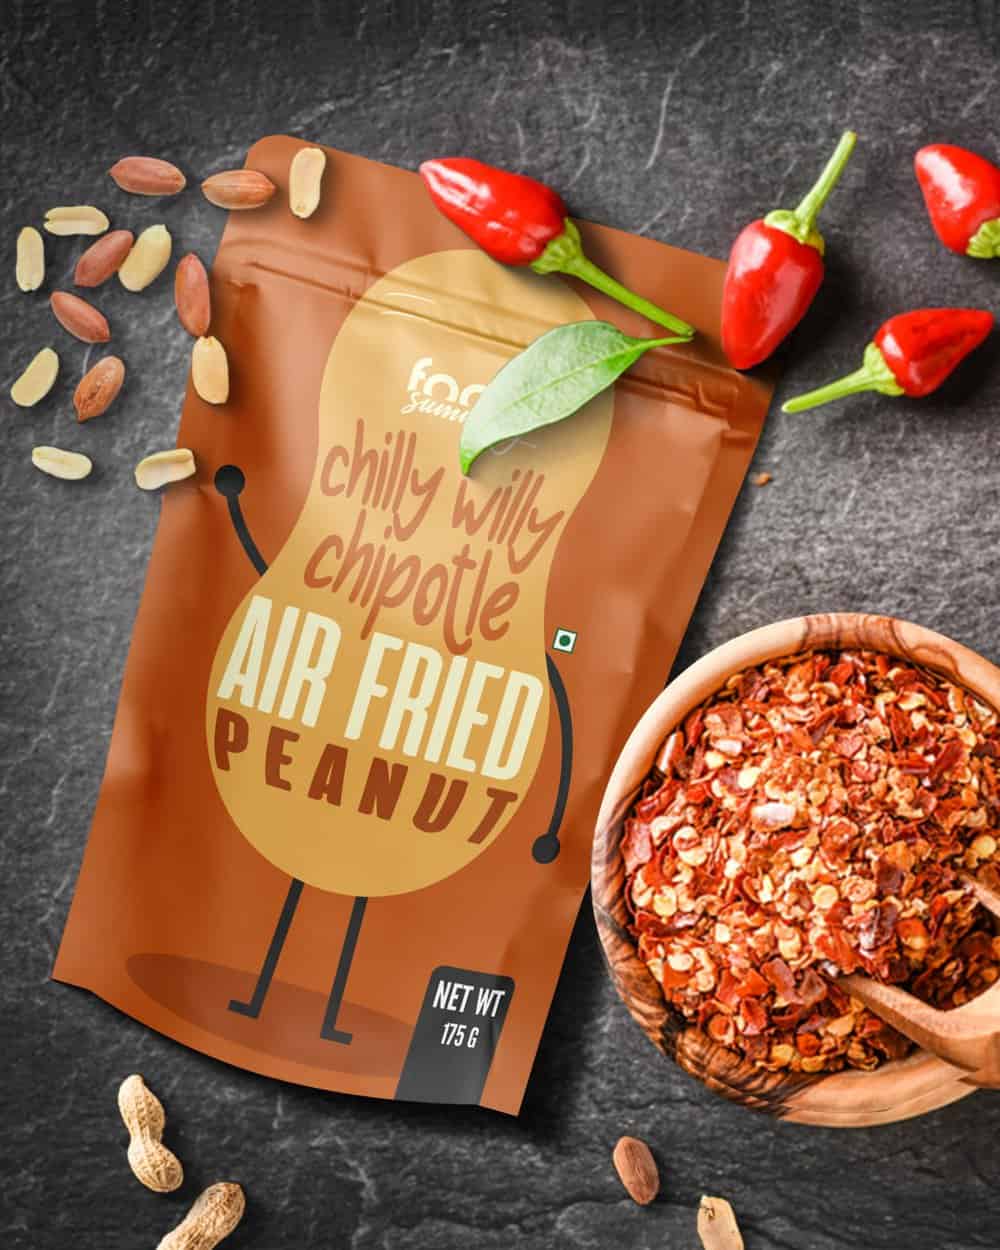 Chilly Willy Chipotle Air Fried Peanut (175g)